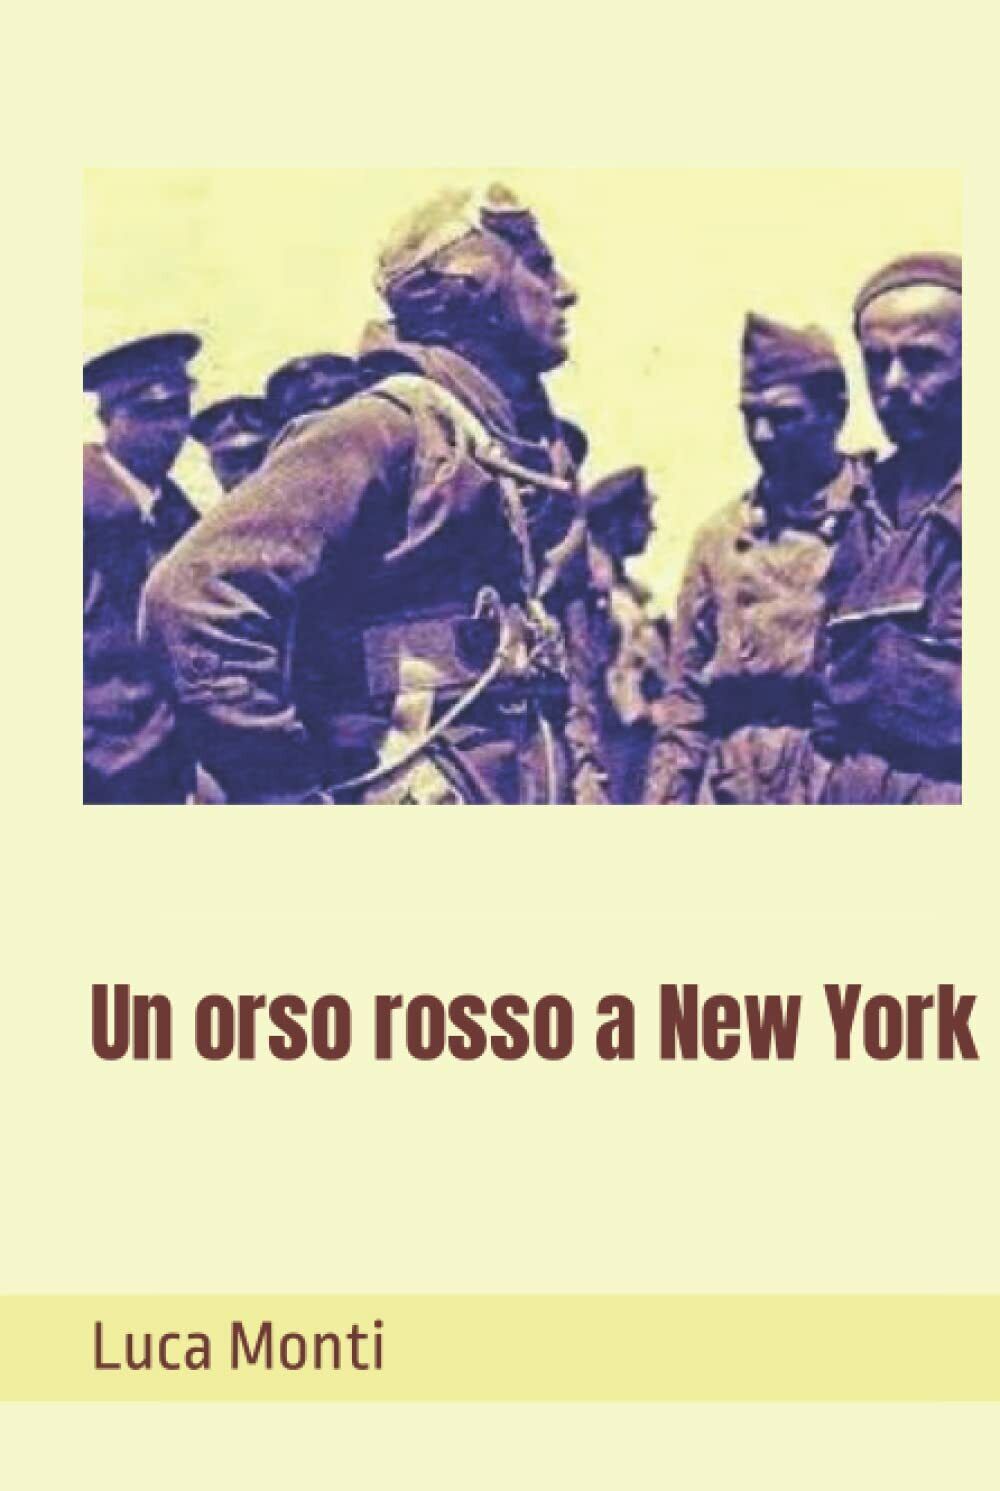 Un orso rosso a New York di Luca Monti,  2021,  Indipendently Published